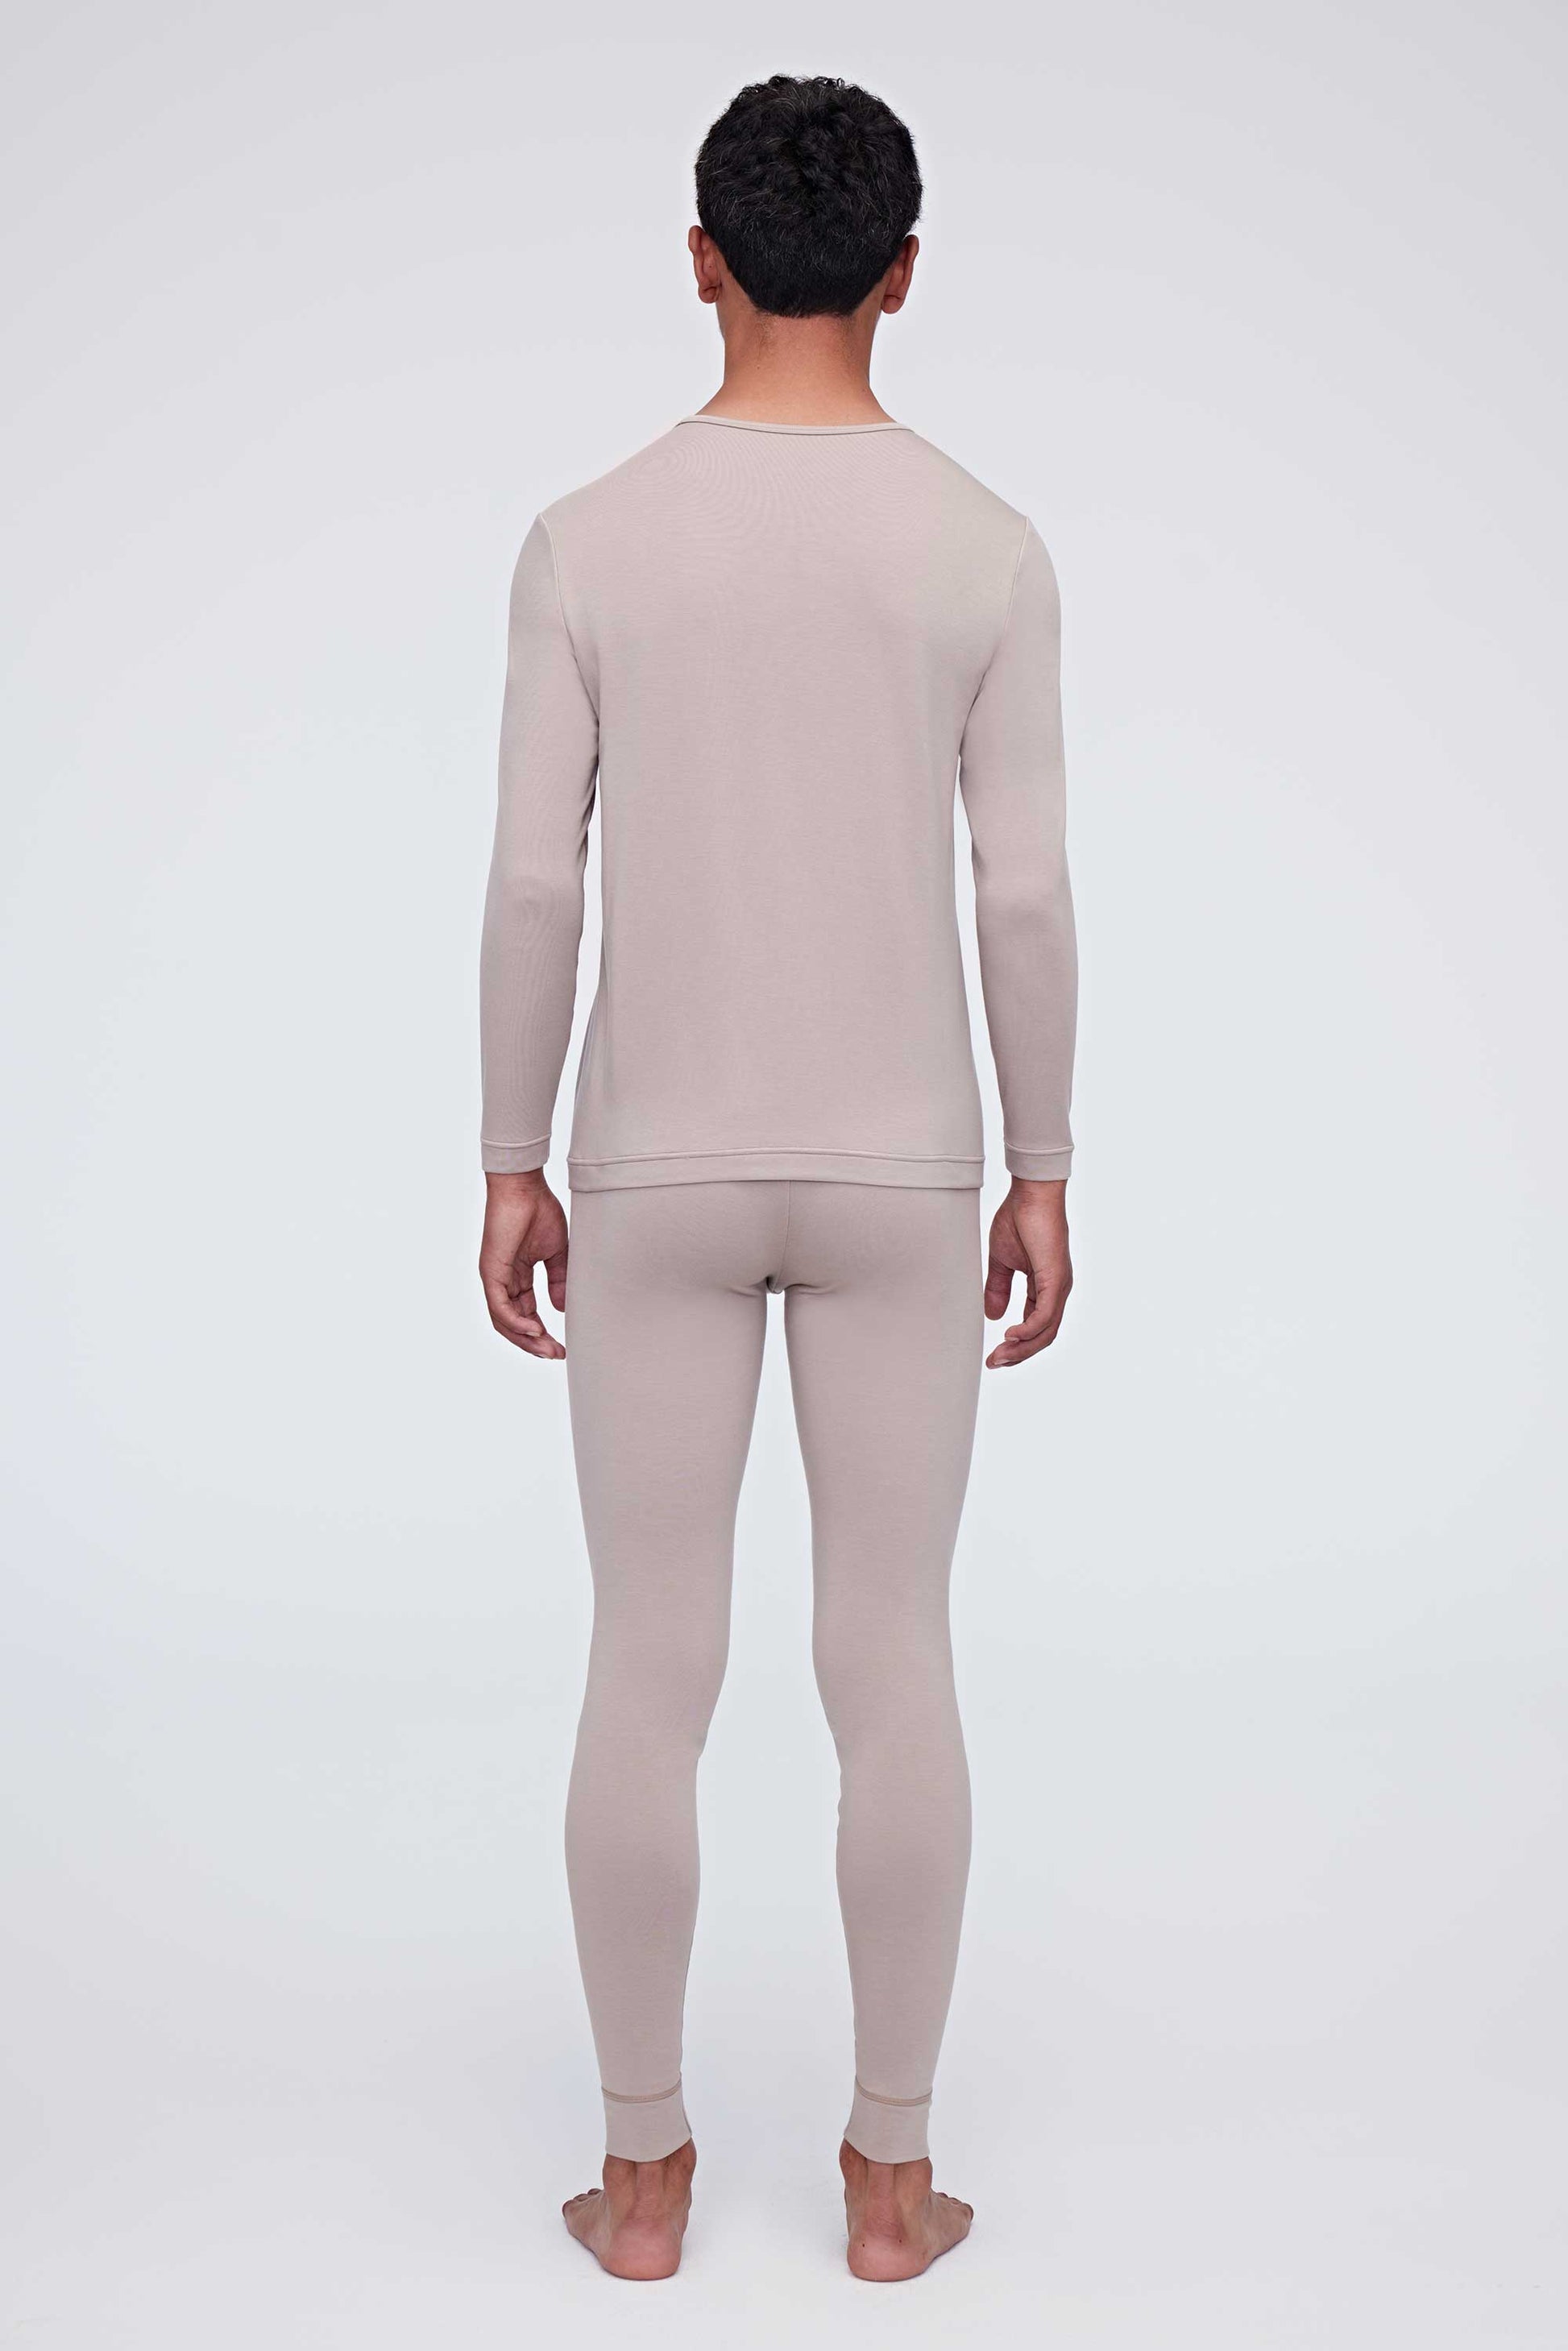 The back of the ginger gray thermal set